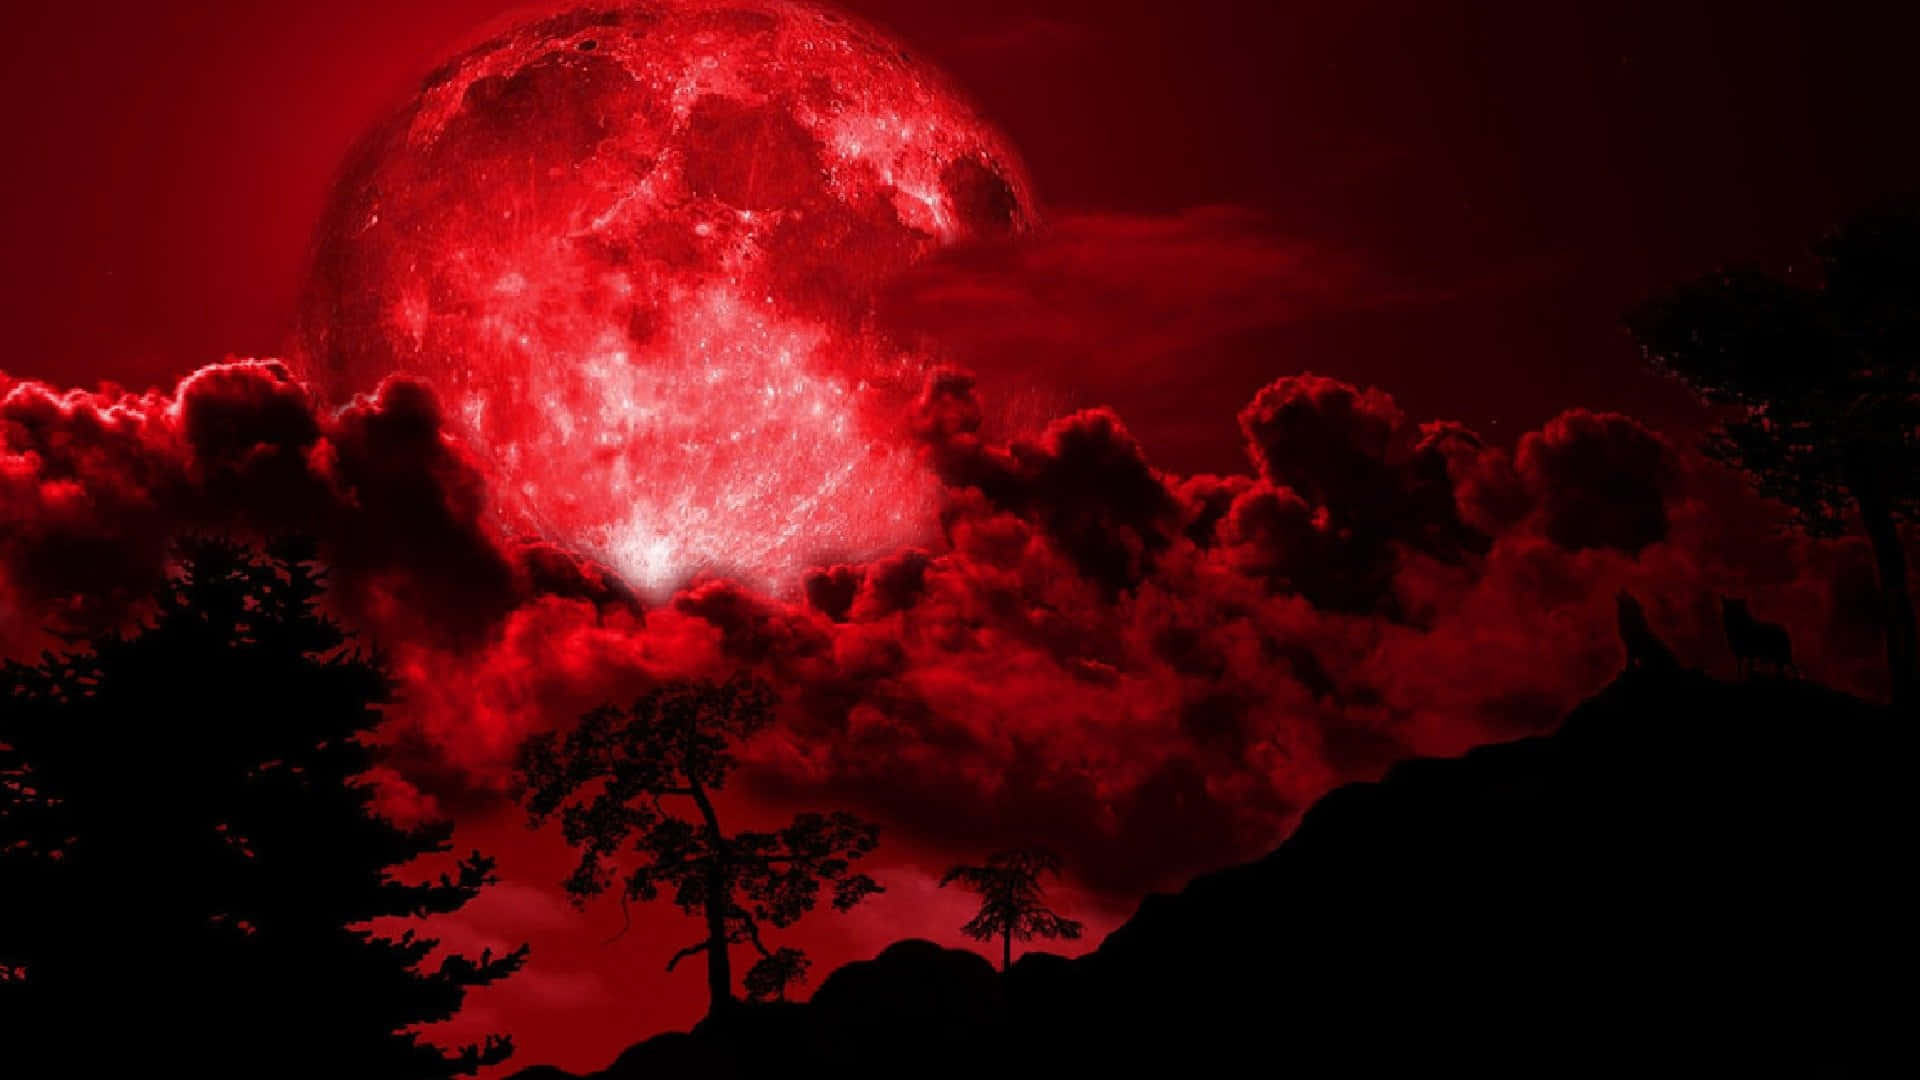 Dark Aesthetic Red Sky Picture